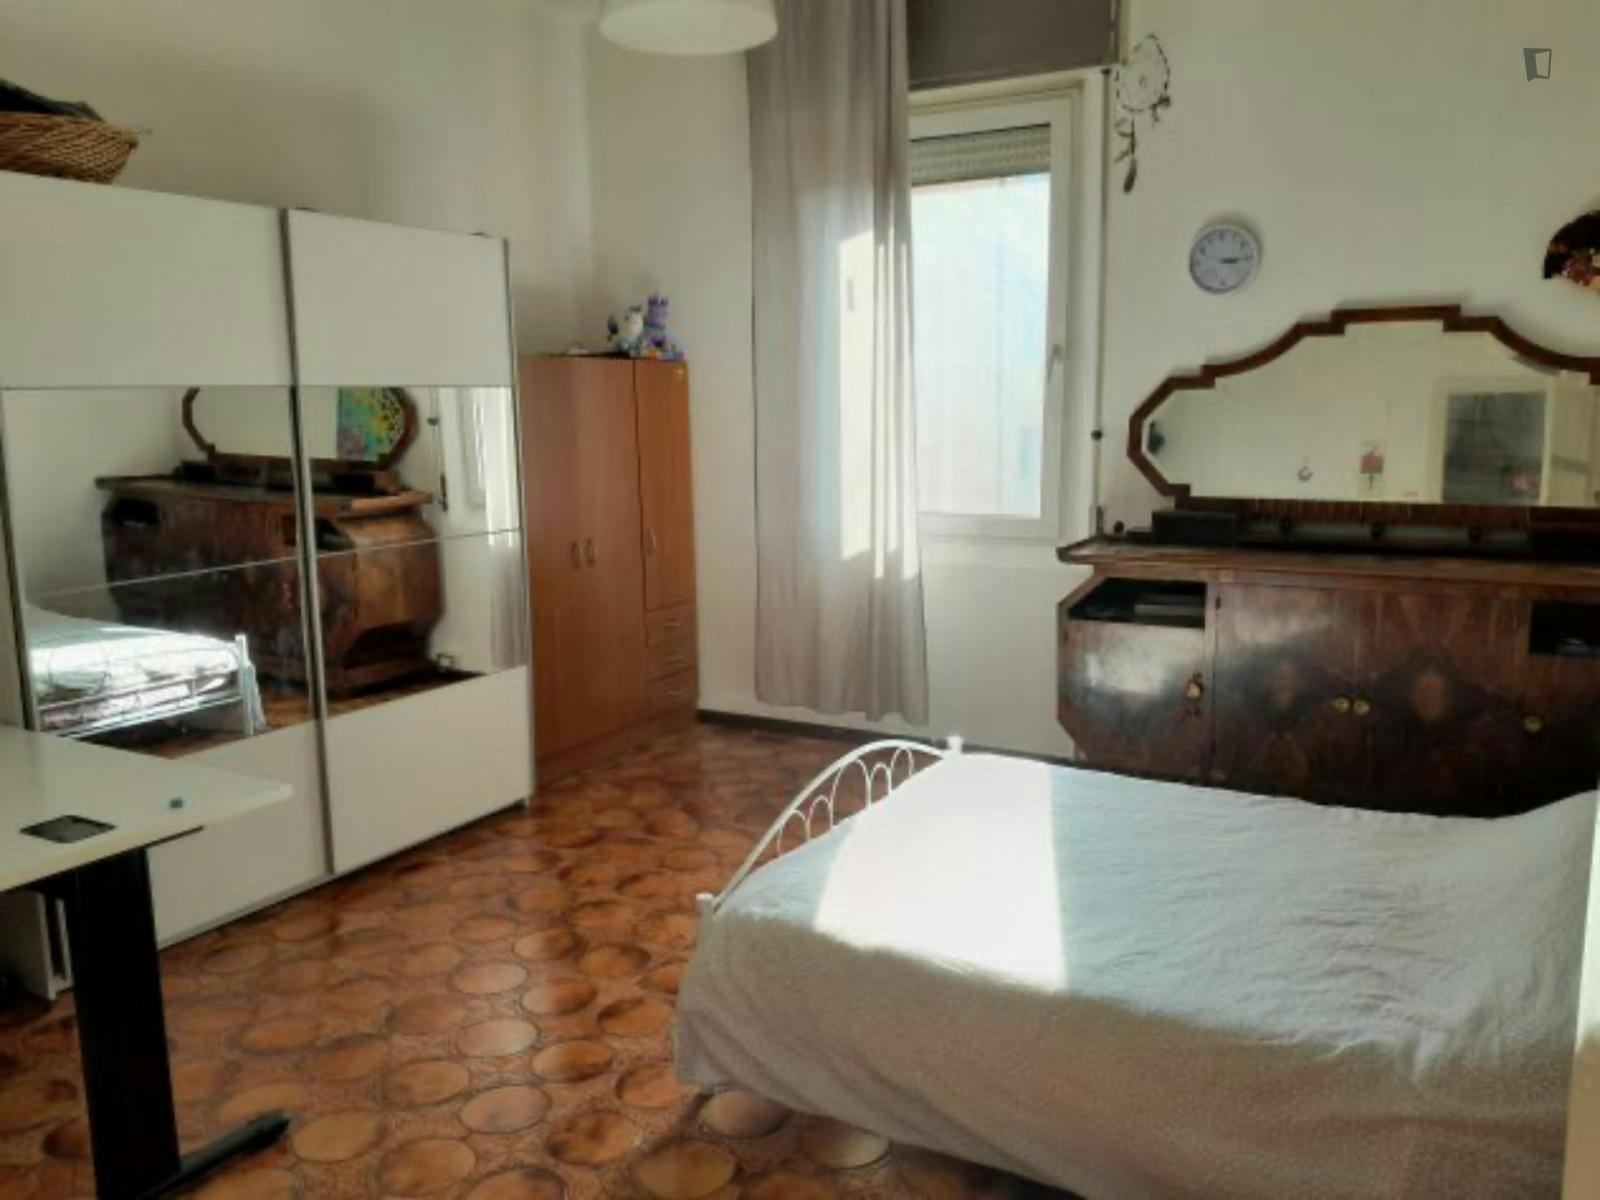 Bright Double Bedroom In Bologna Near Central Station And Via Indipendenza